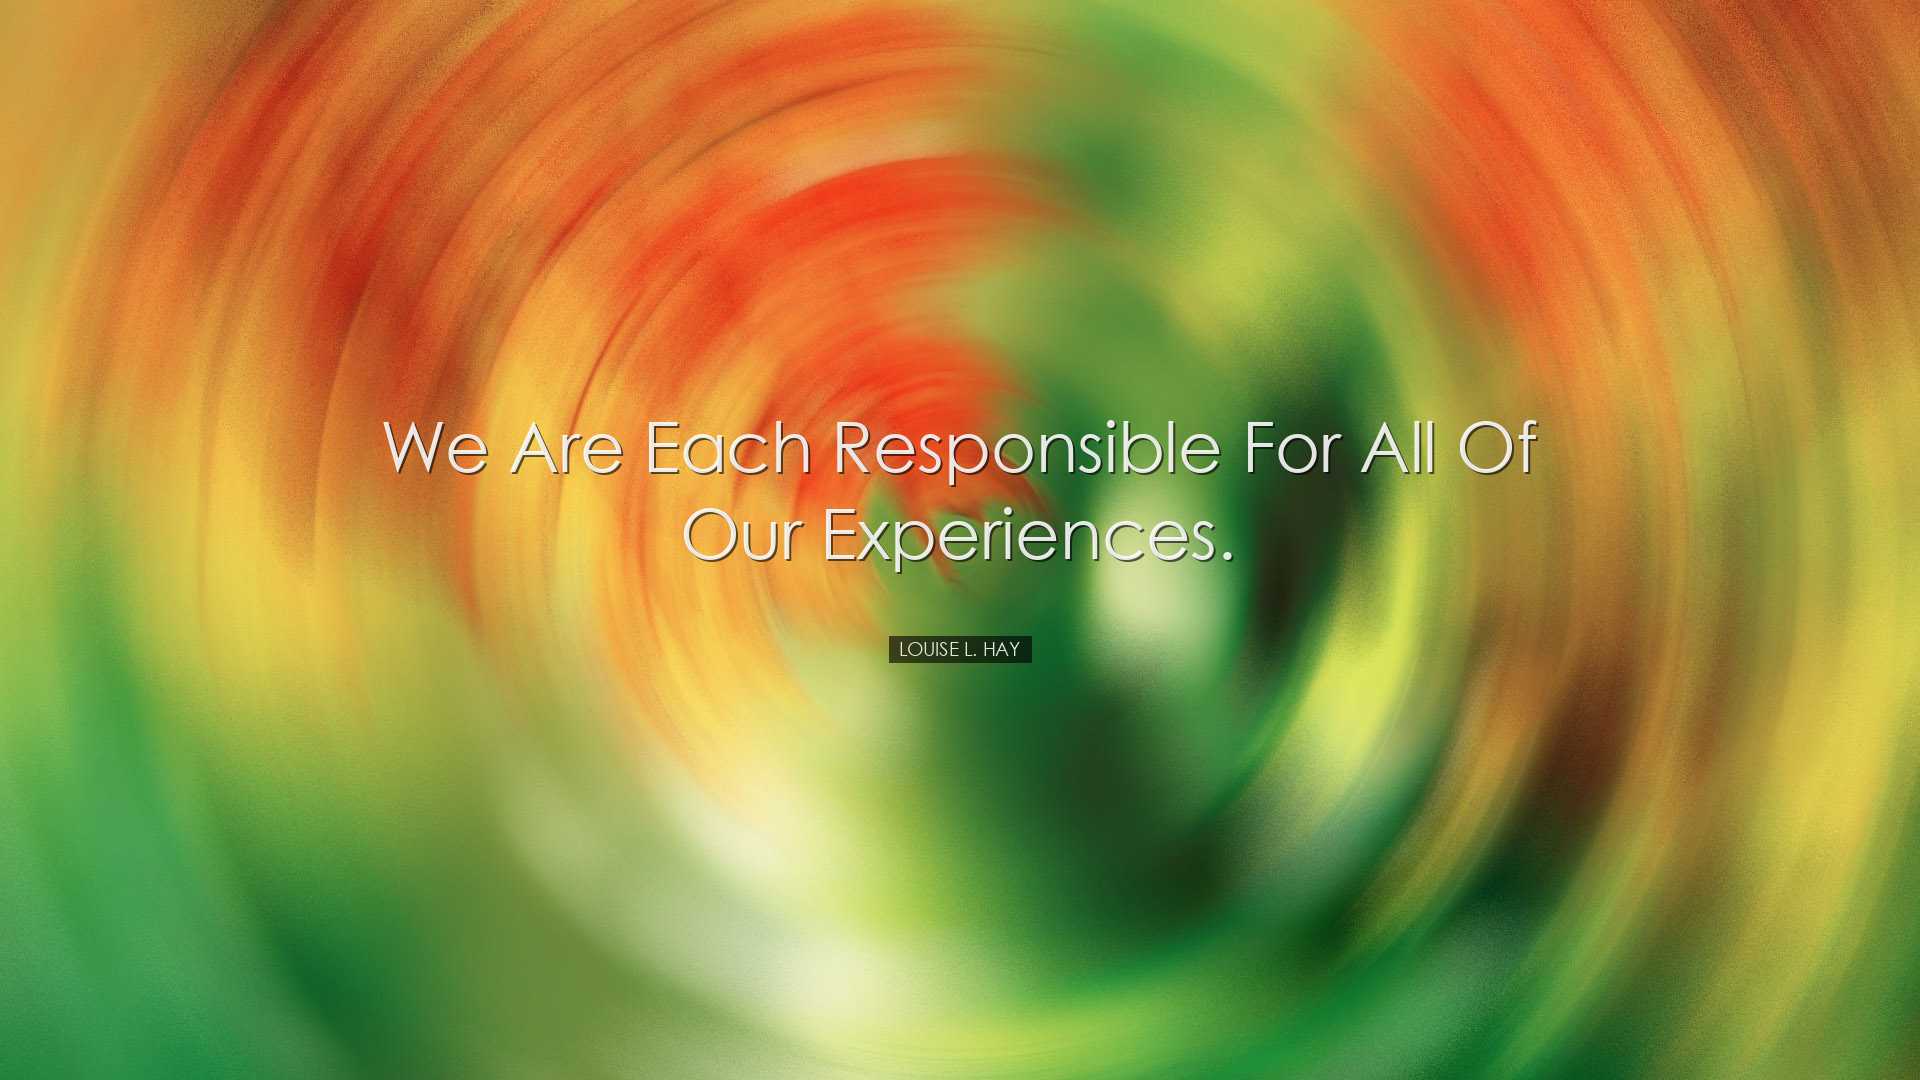 We are each responsible for all of our experiences. - Louise L. Ha